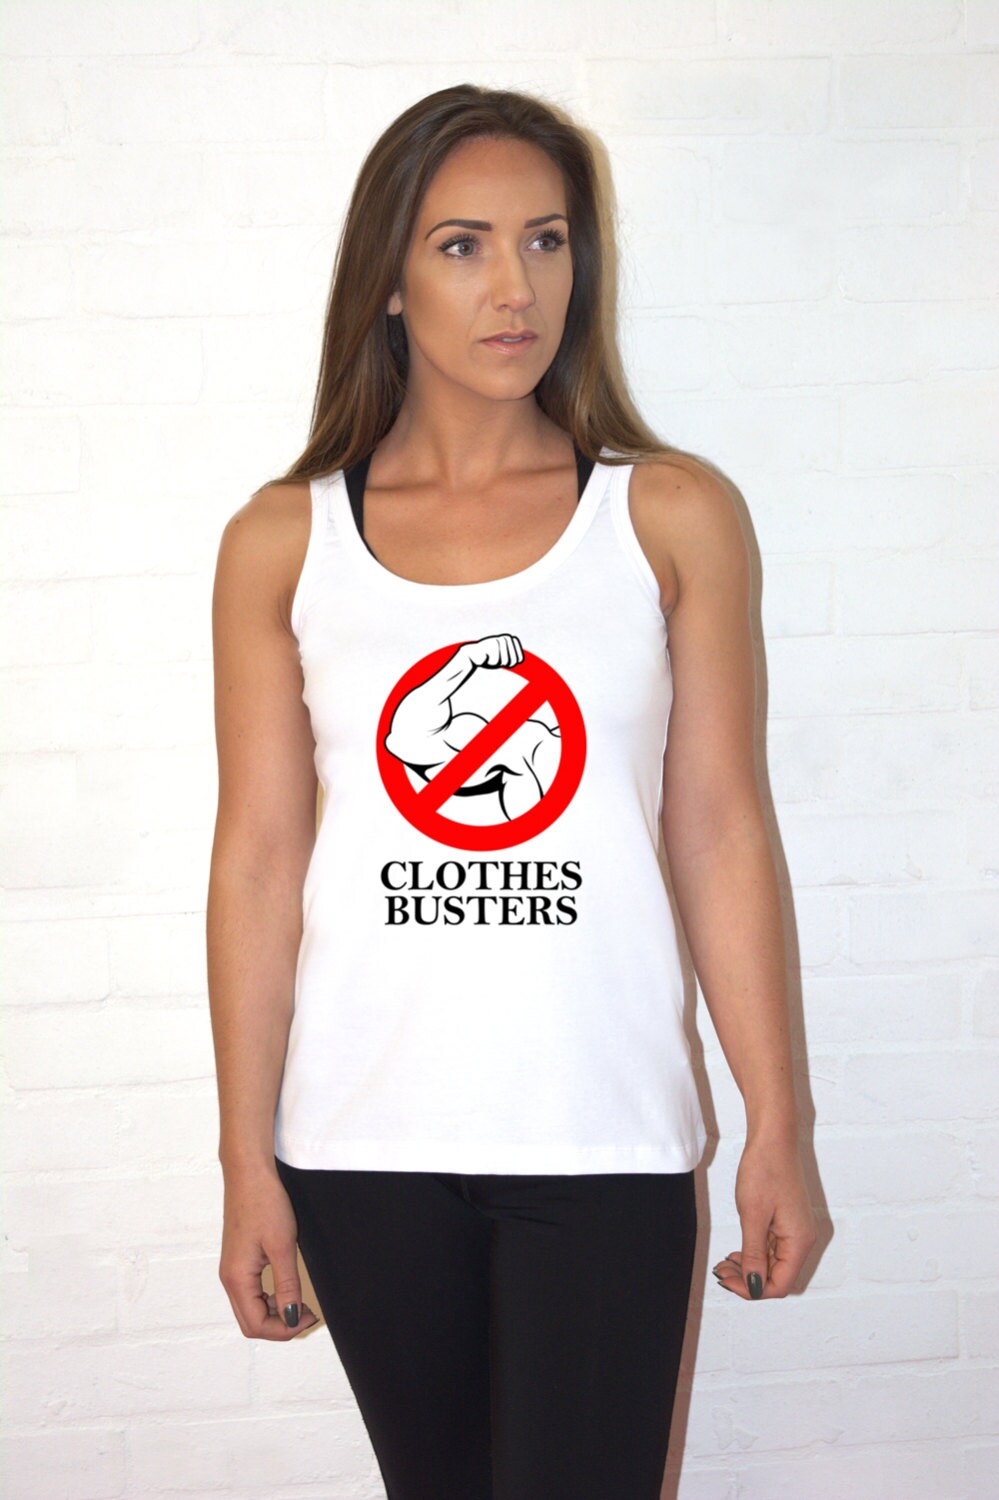 Clothesbusters ghostbusters Women's Gym Vest/tank 